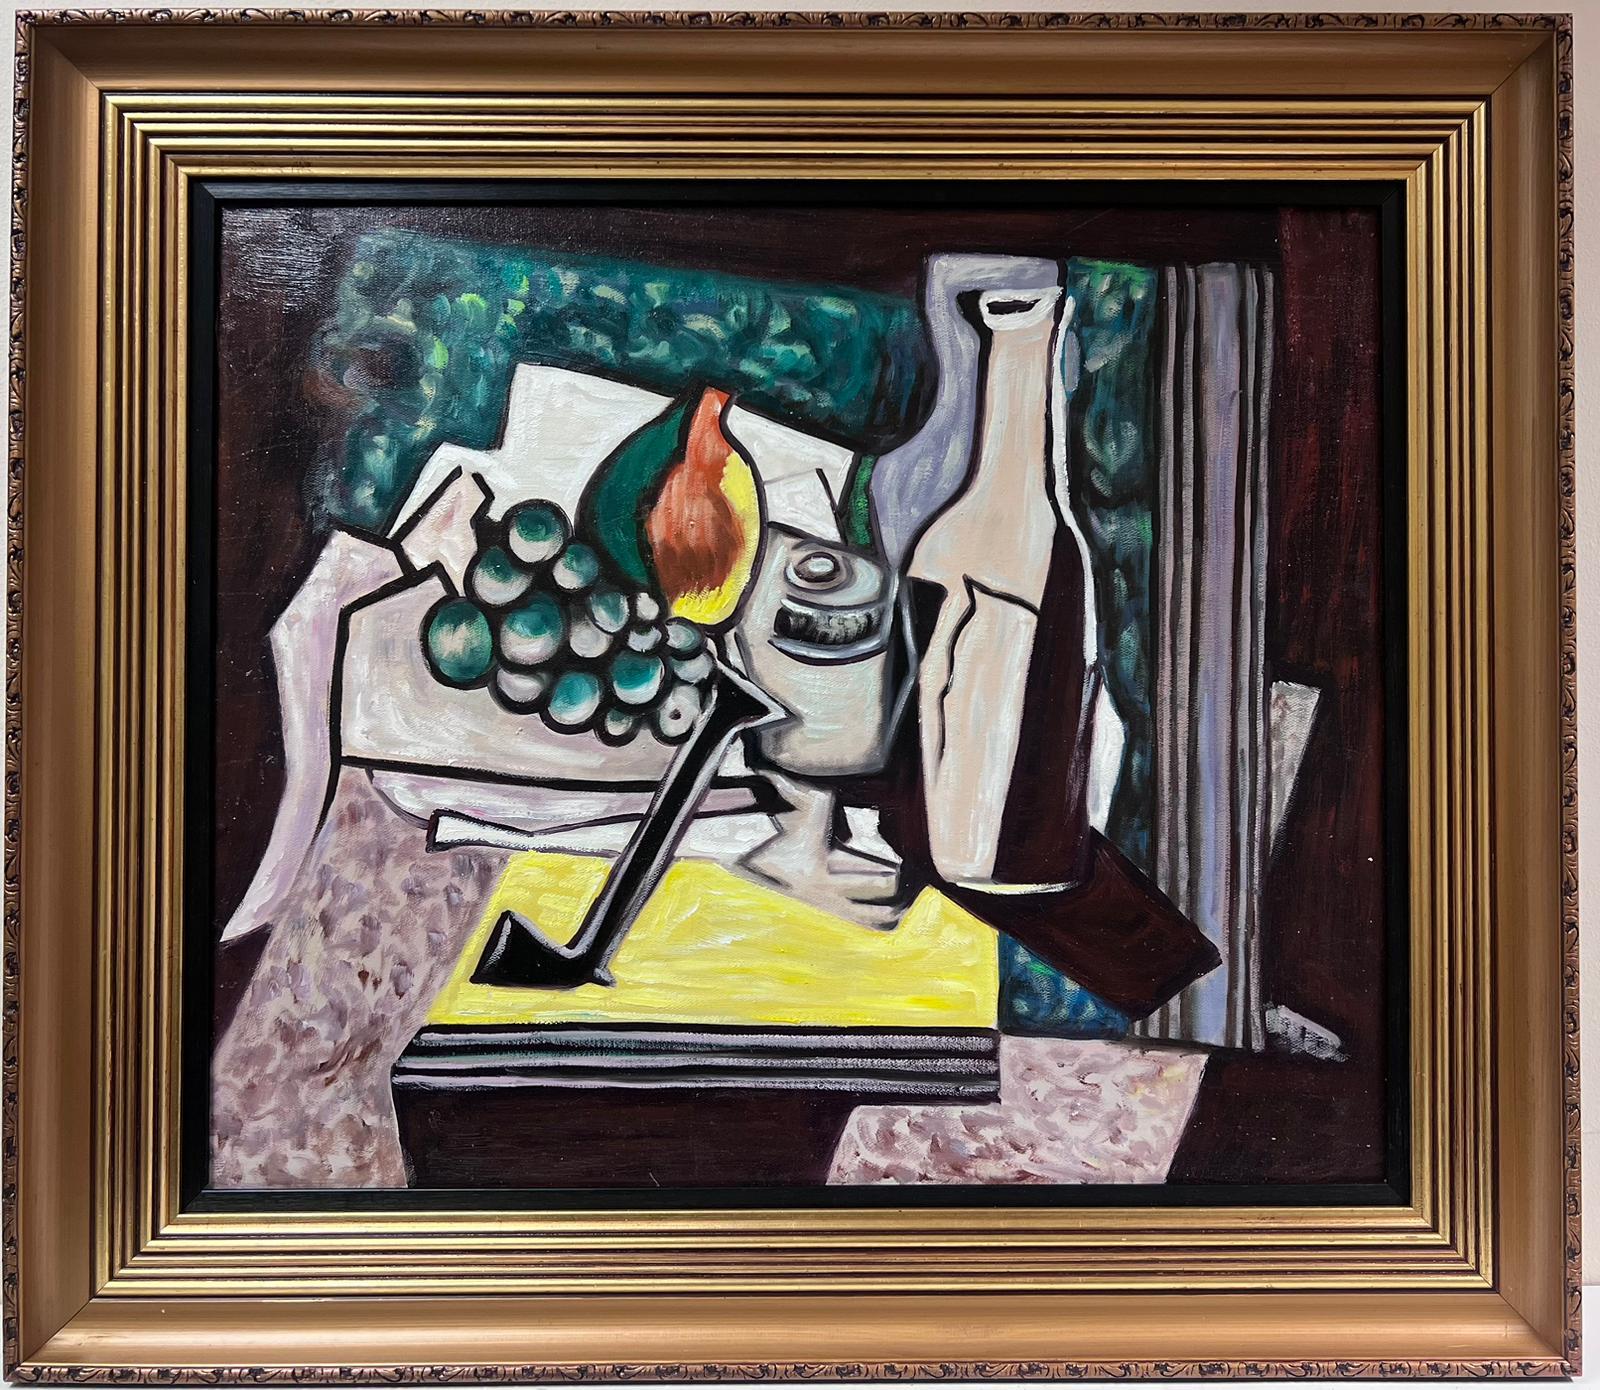 Cubist Still Life 
French School, 20th century
oil on board, framed
framed: 27 x 31 inches
board : 22 x 26 inches
provenance: private collection, France
condition: very good and sound condition 